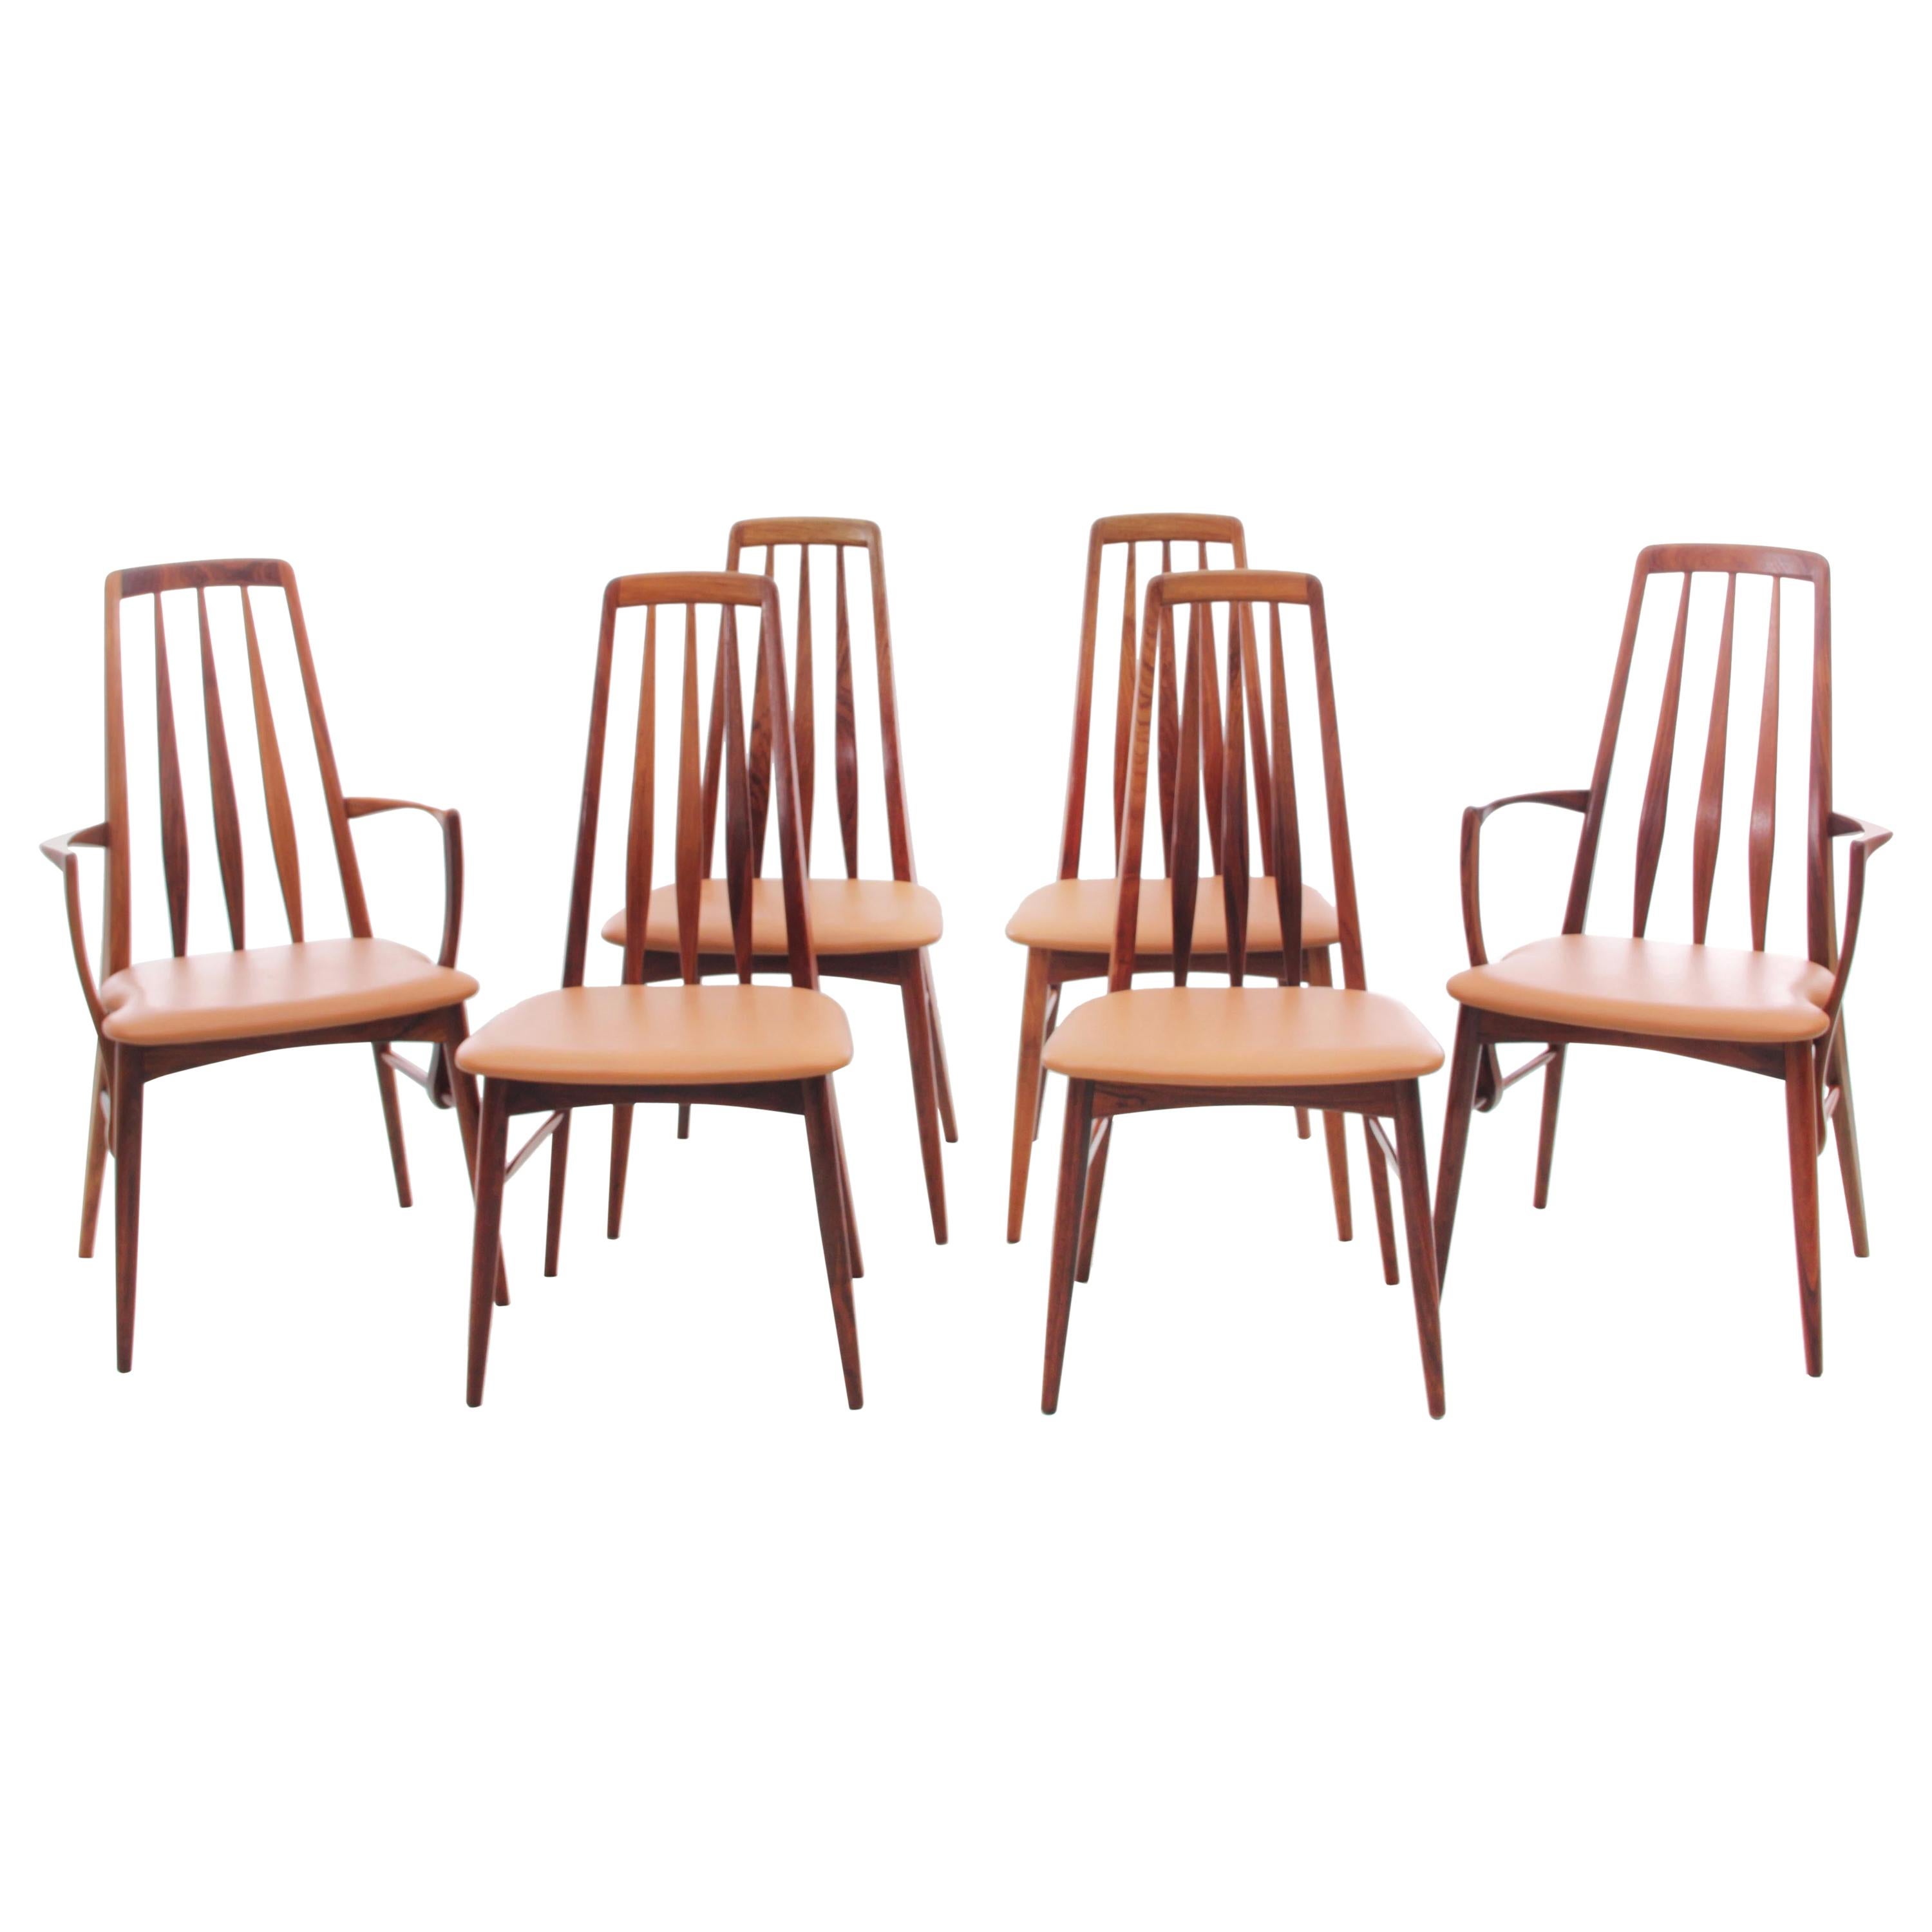 Mid-Century Modern Scandinavian Danish Set of 4 Chairs and 2 Armchairs For Sale